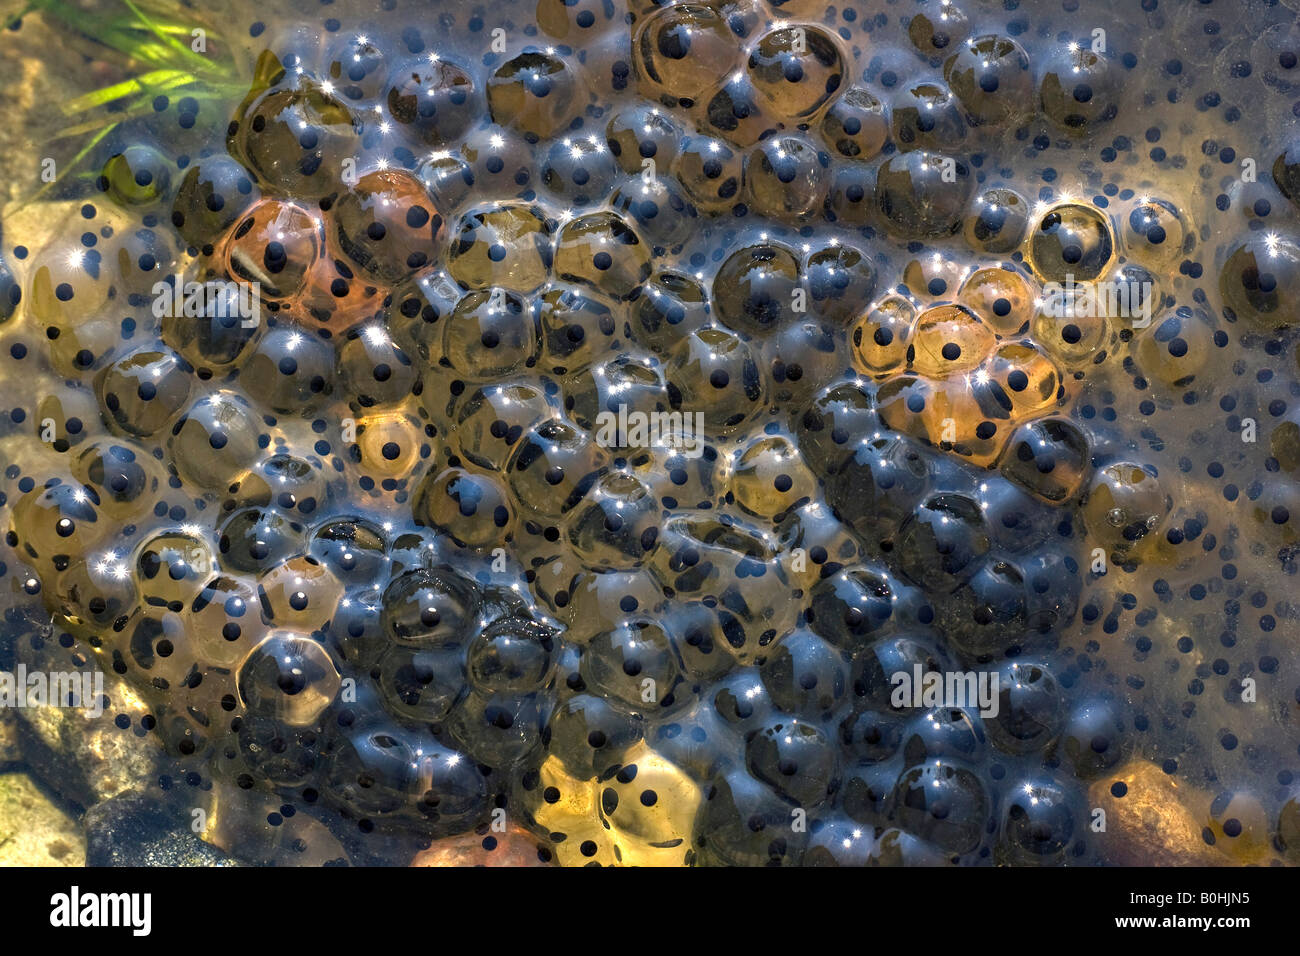 European Common Brown Frog (Rana temporaria), frog spawn, frog eggs in shallow water Stock Photo